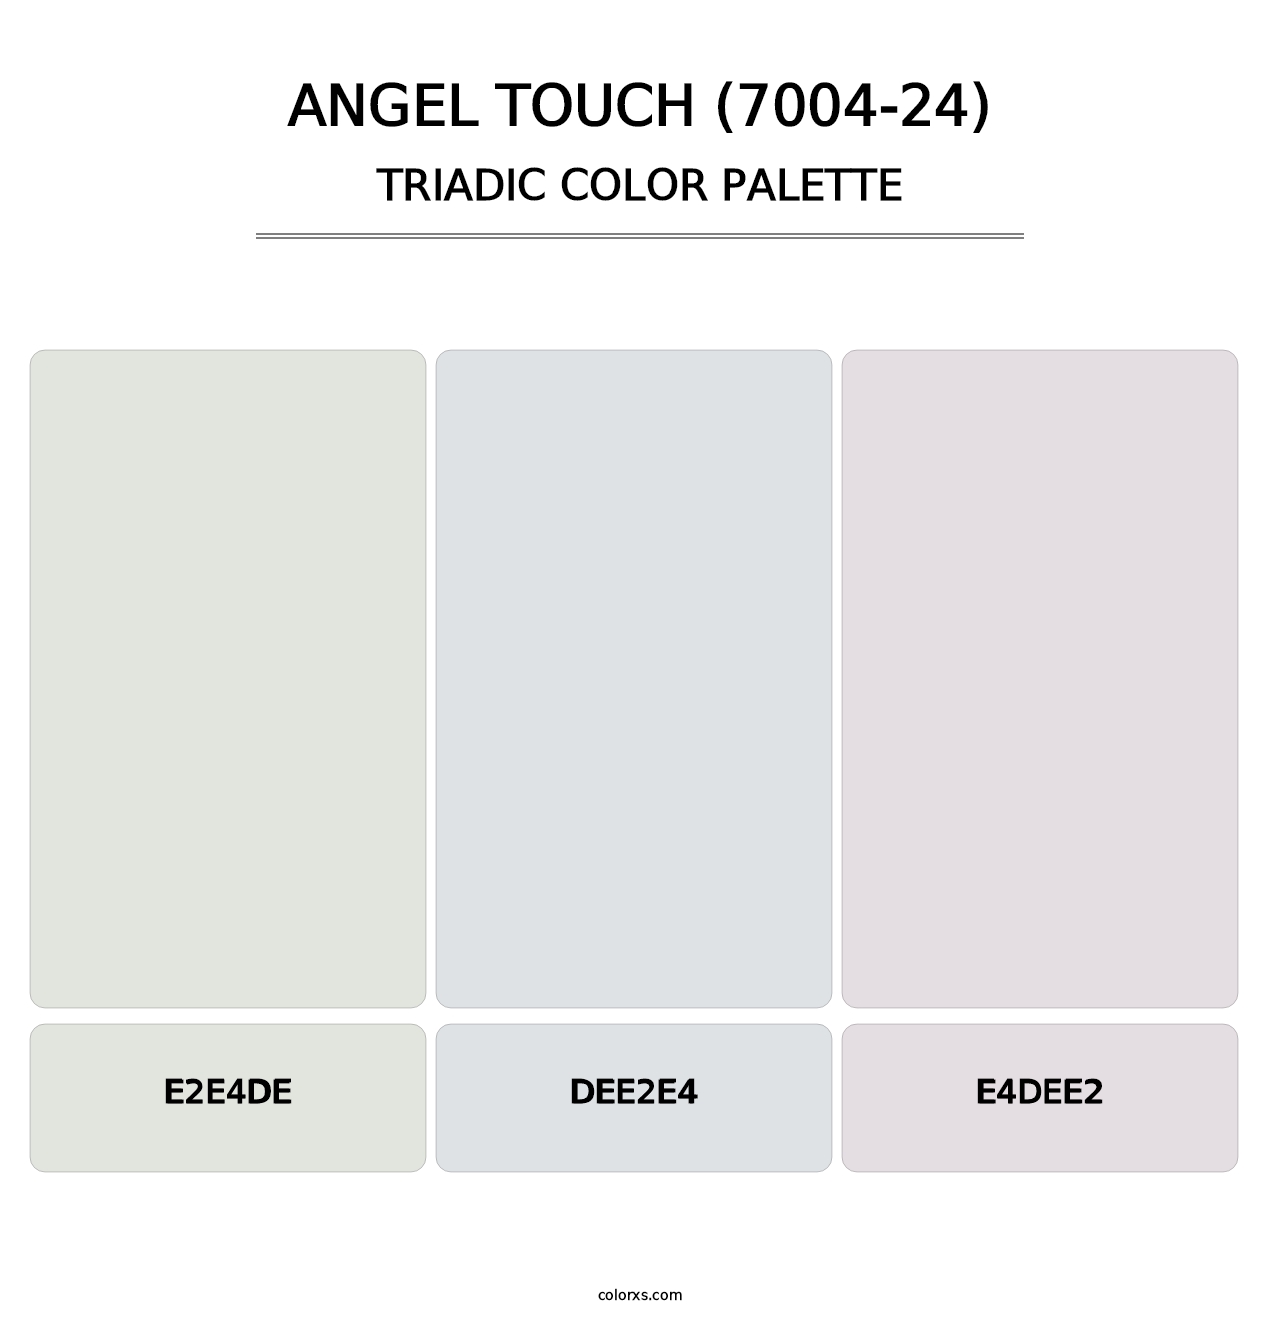 Angel Touch (7004-24) - Triadic Color Palette